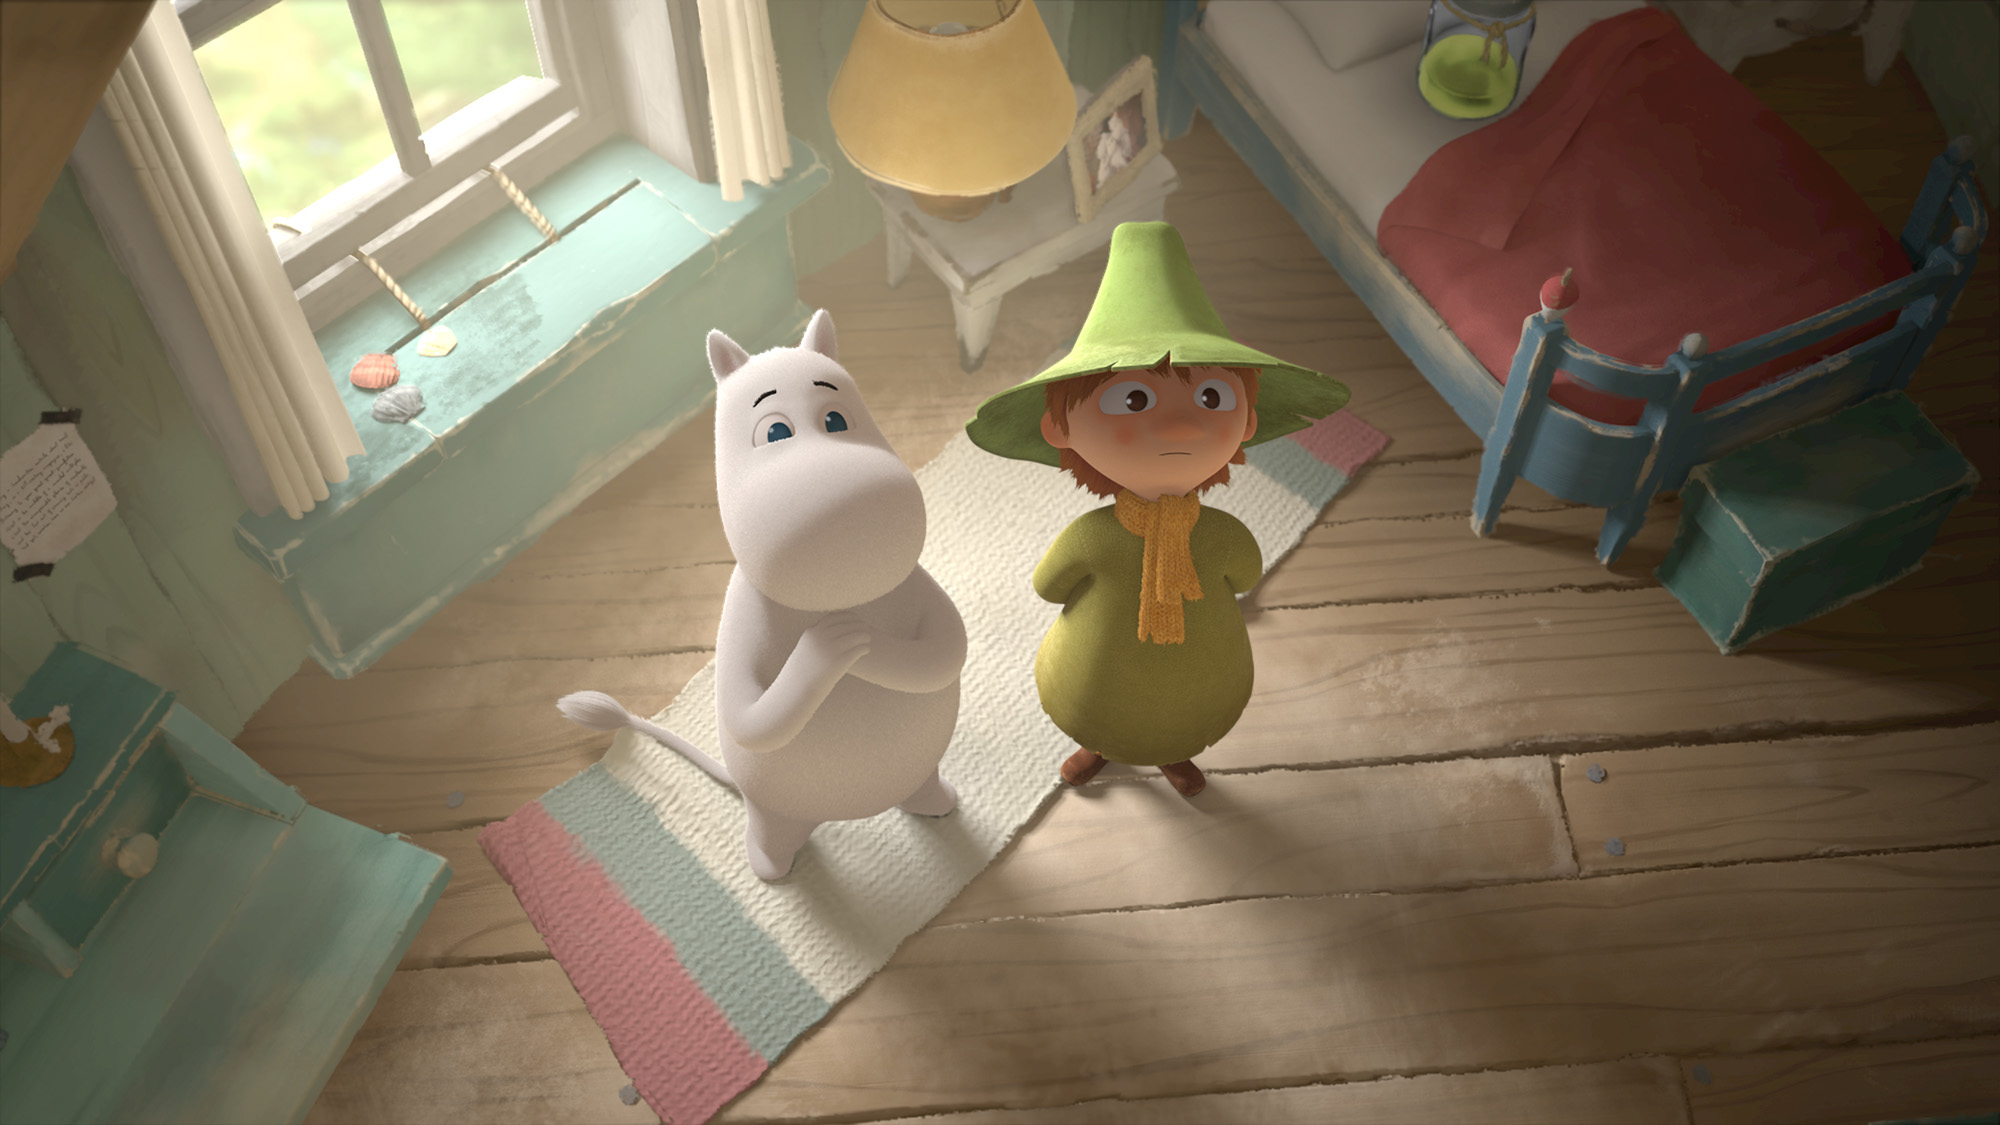 Still from the 2019 animation series Moominvalley. Moomintroll and Snufkin stand next to each other in a room and look up.